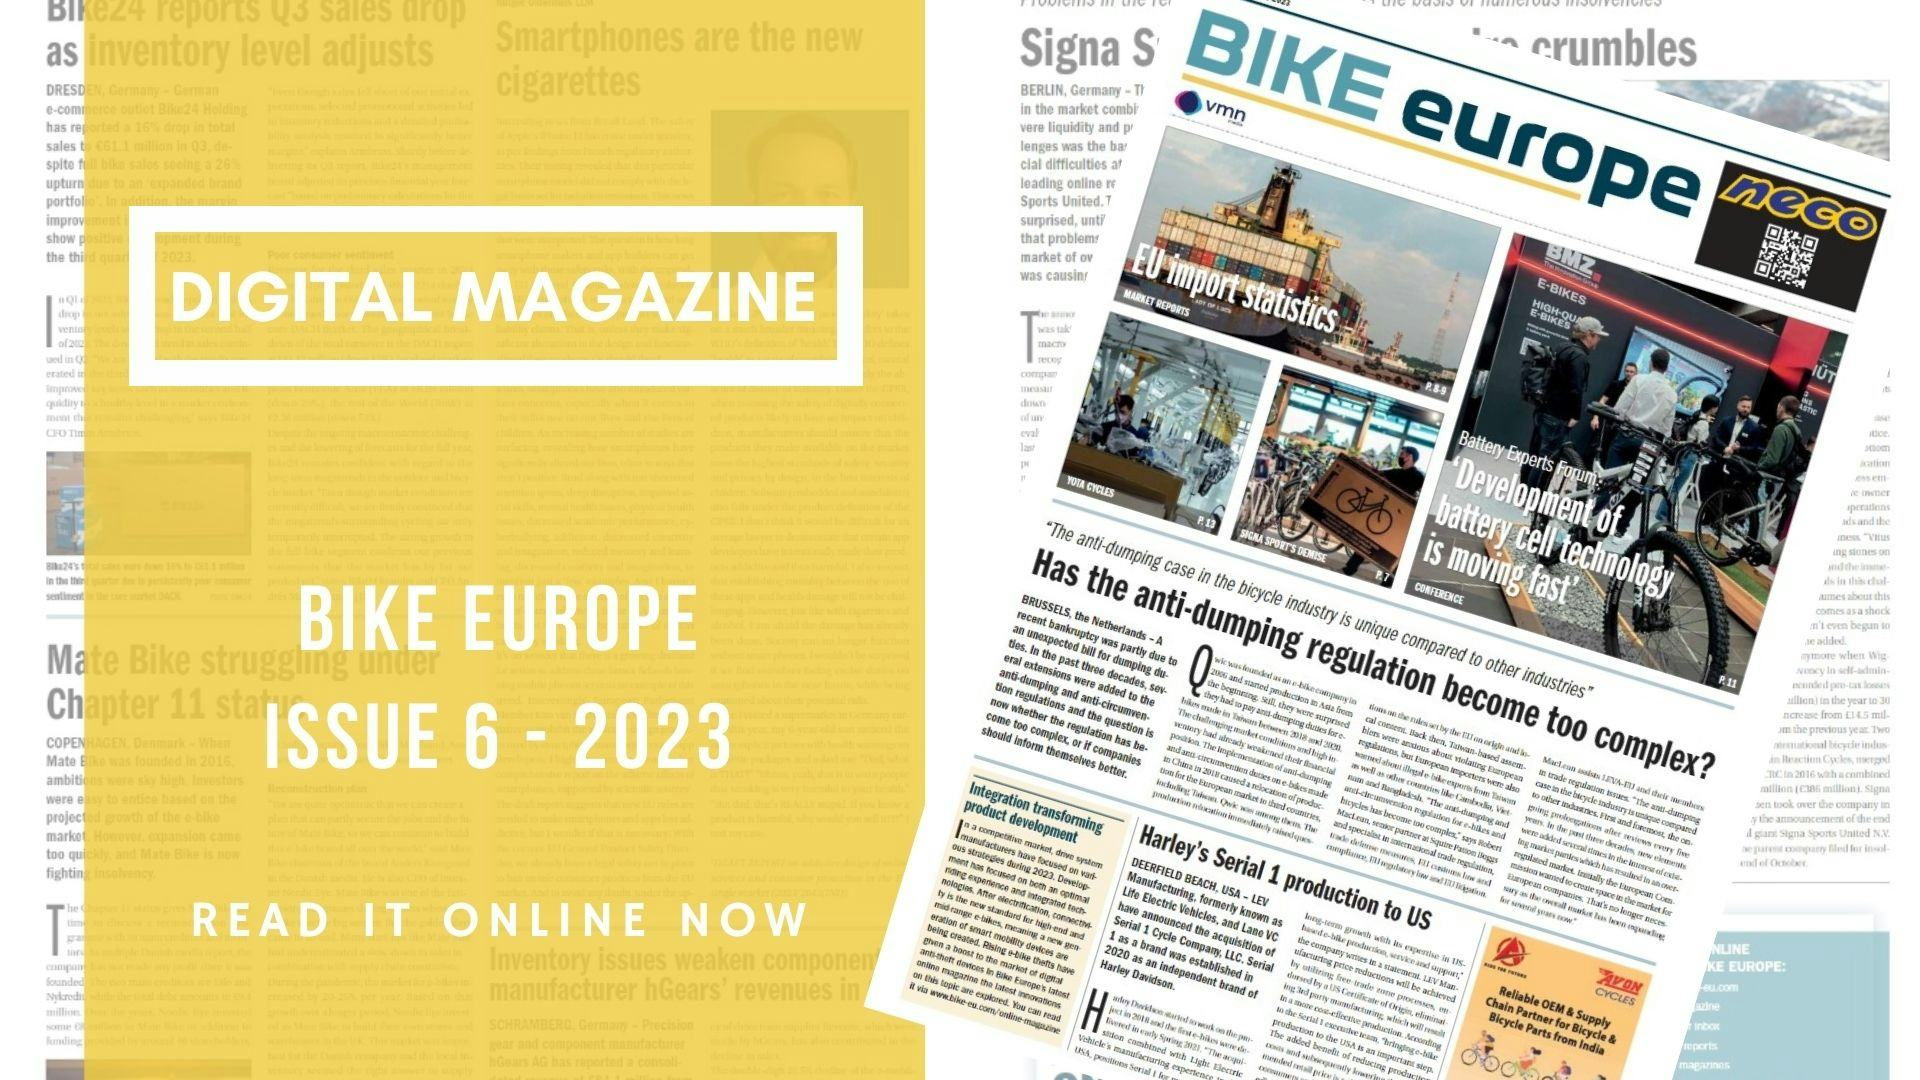 Bike Europe issue 6/2023 available online now